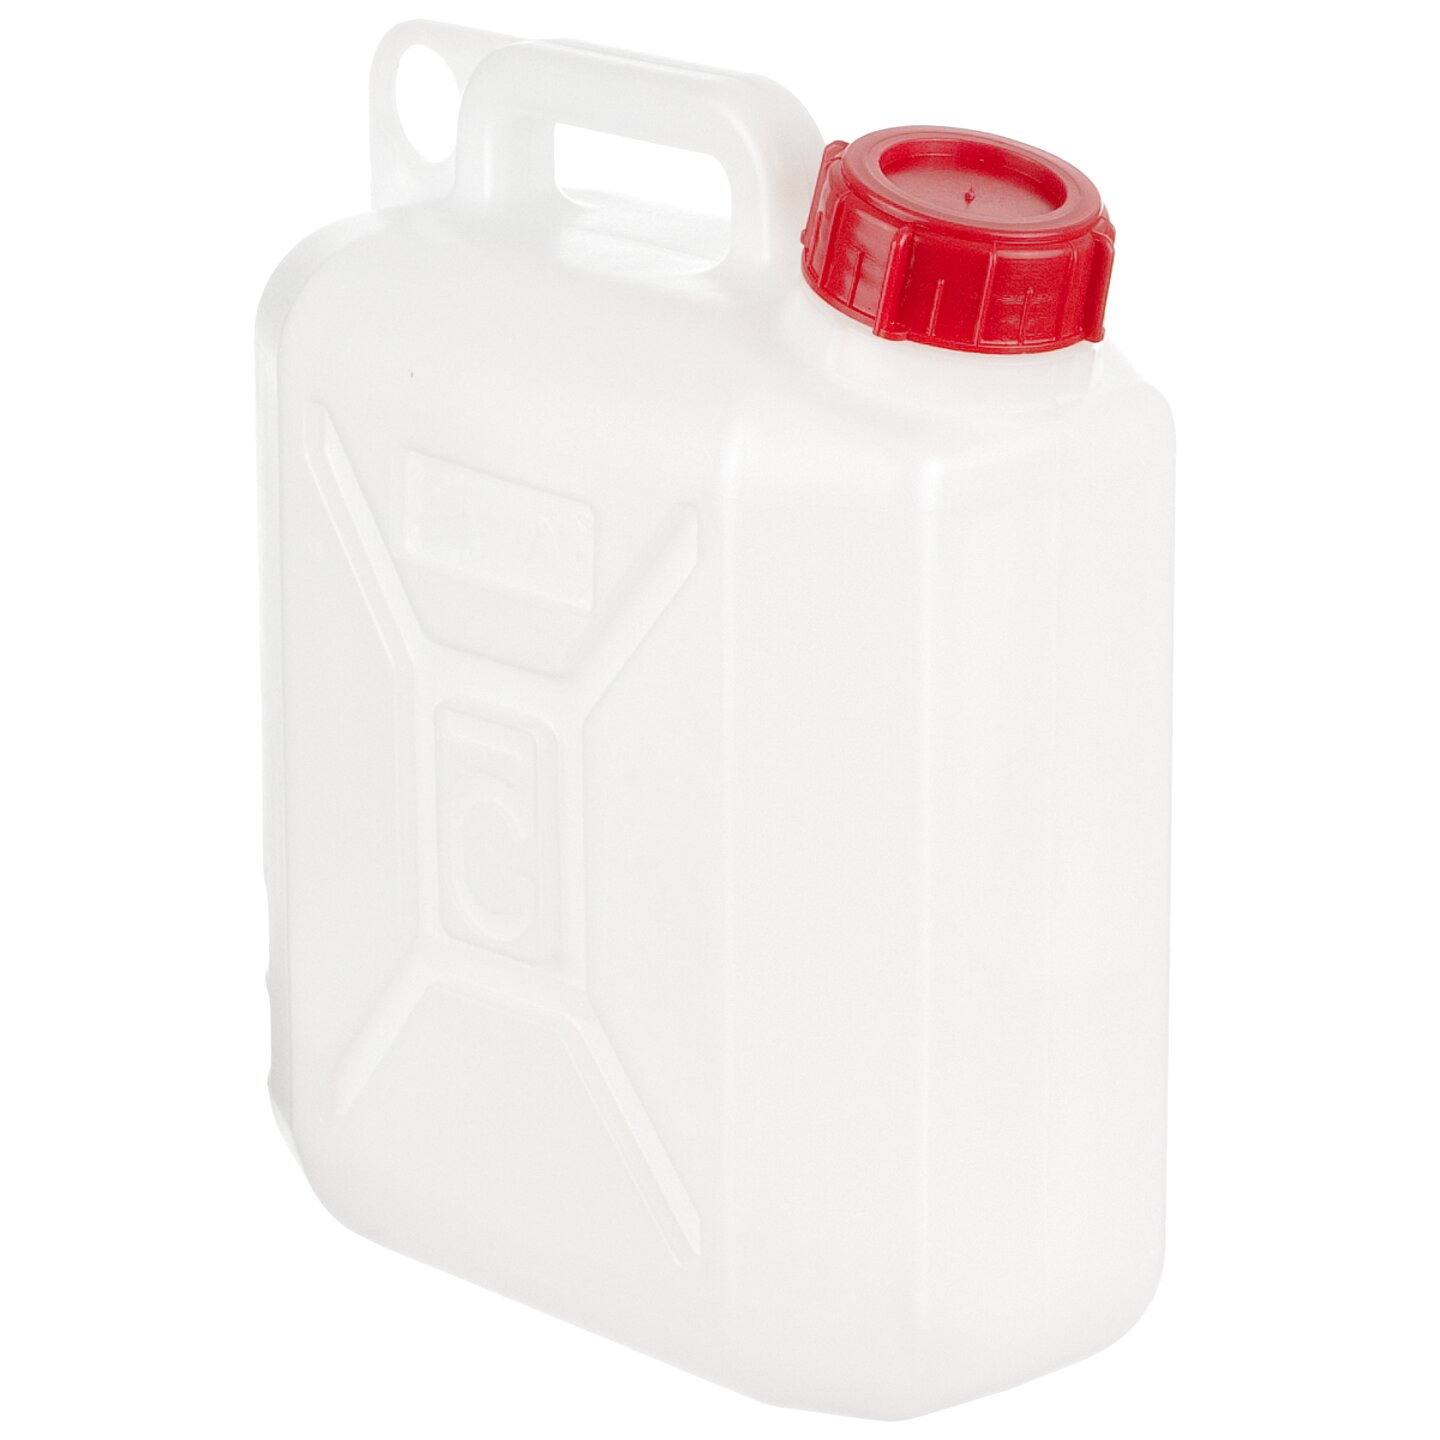 2 taps fully approved drinking water safe food grade 4 x 25 litre jerry cans 